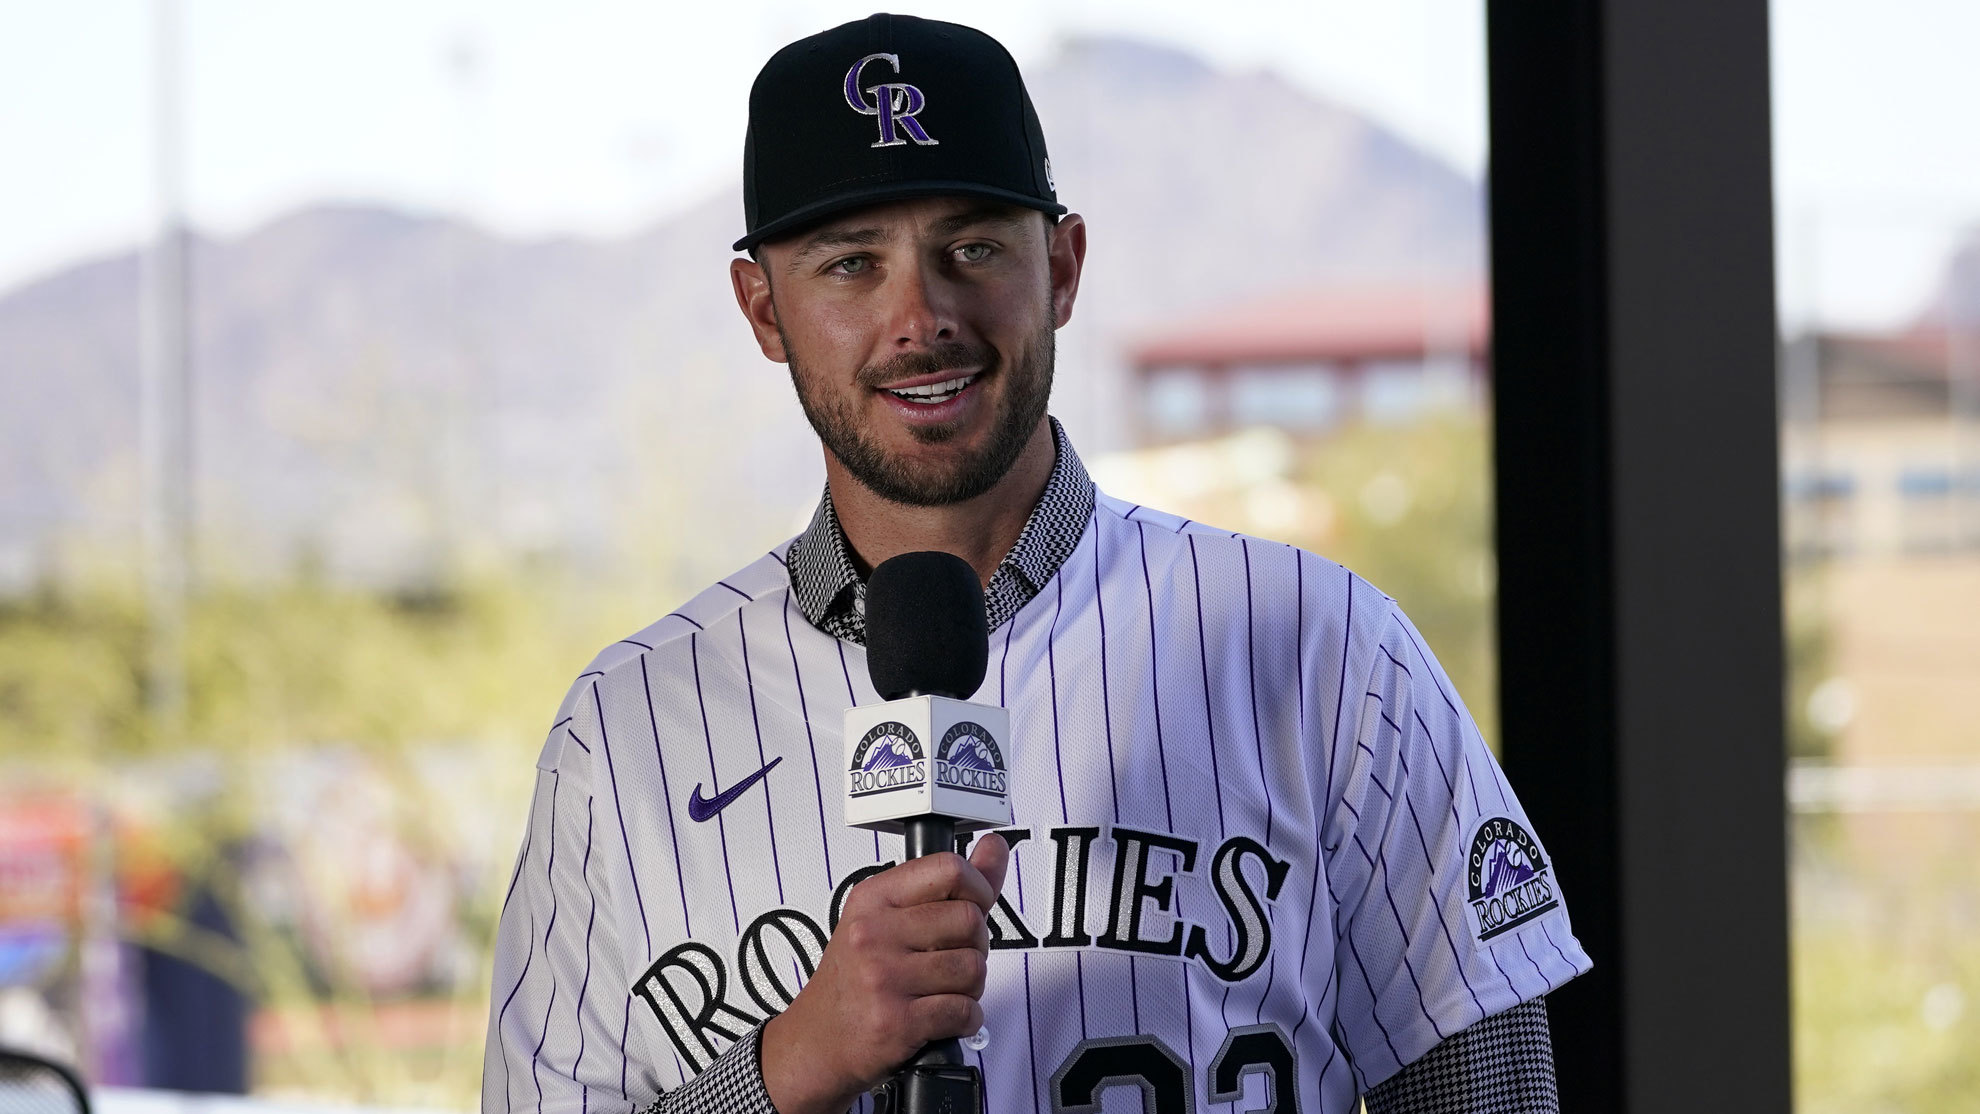 Kris Bryant doesn’t hide his excitement at signing with the Rockies